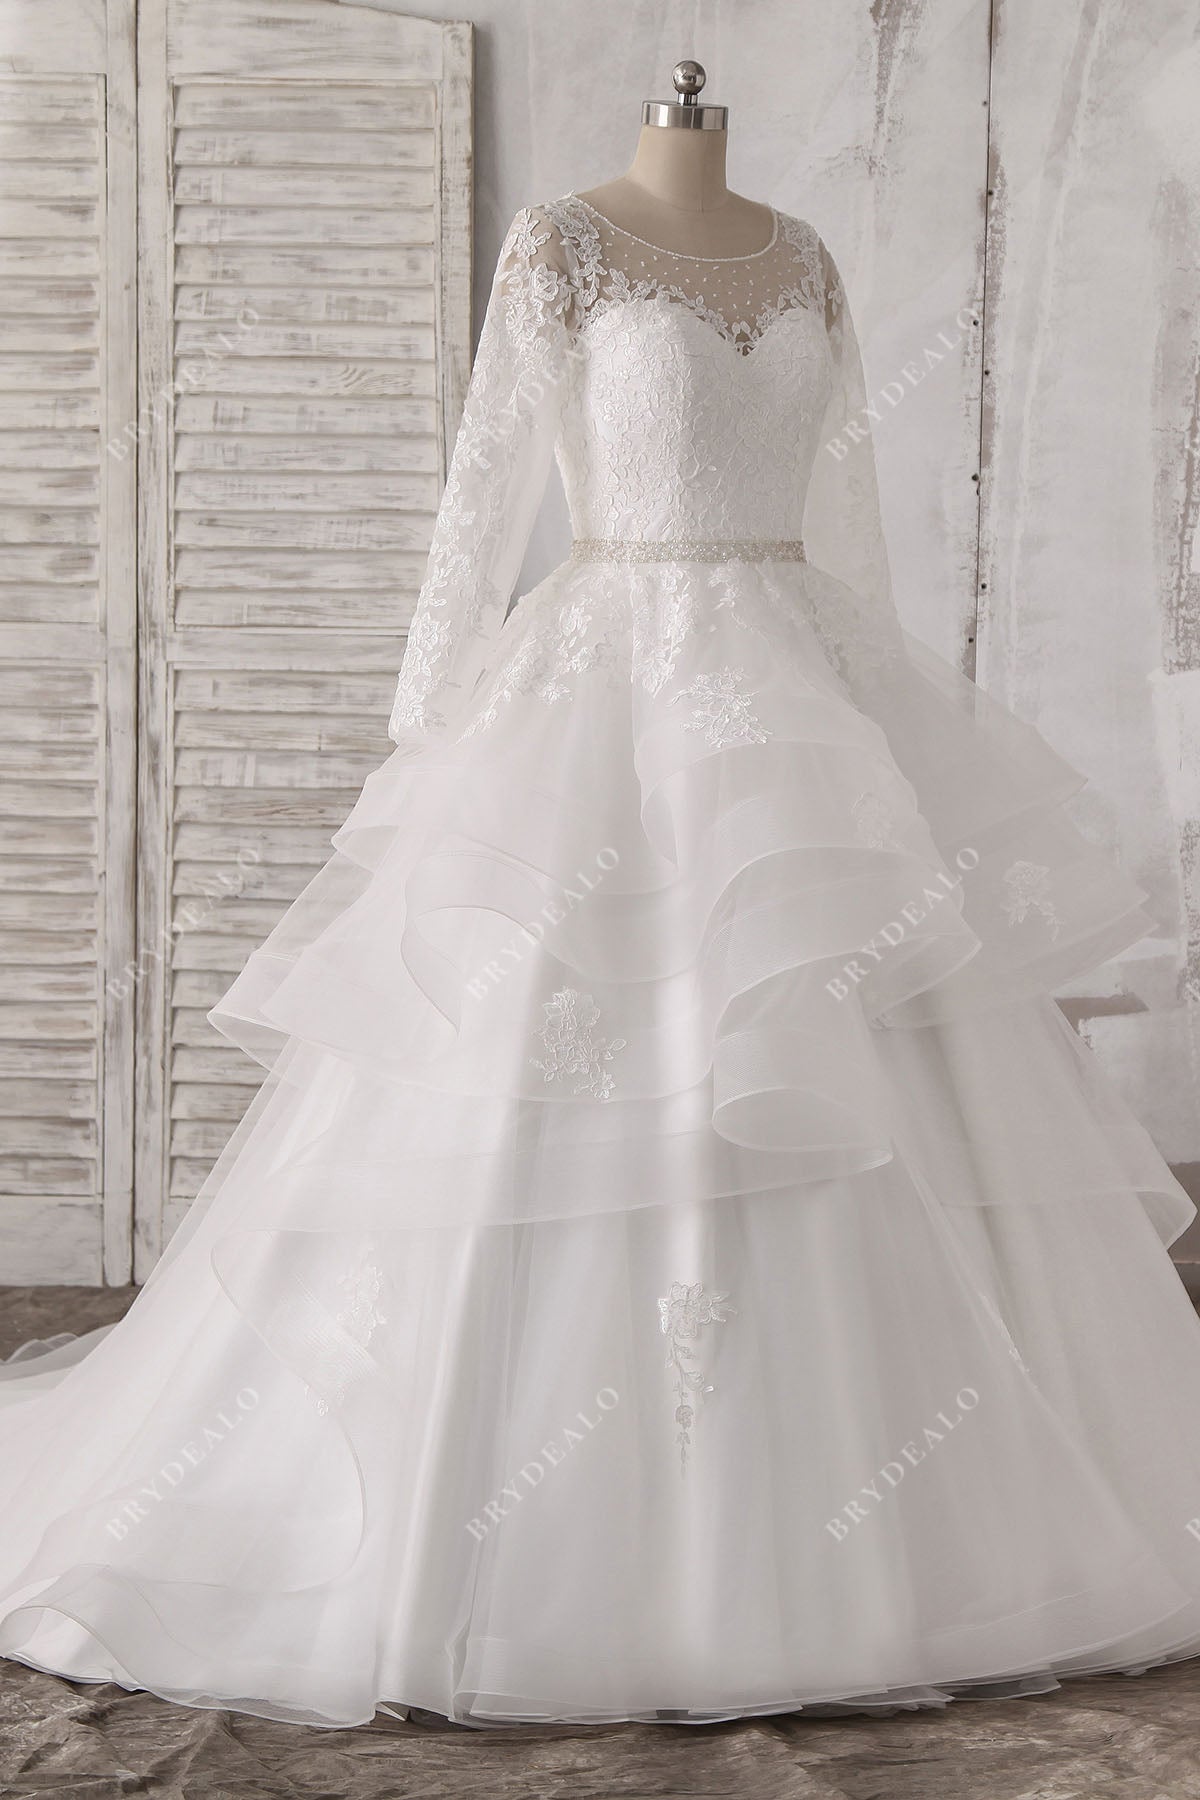 sheer sleeves beaded lace tulle ruffled wedding ball gown